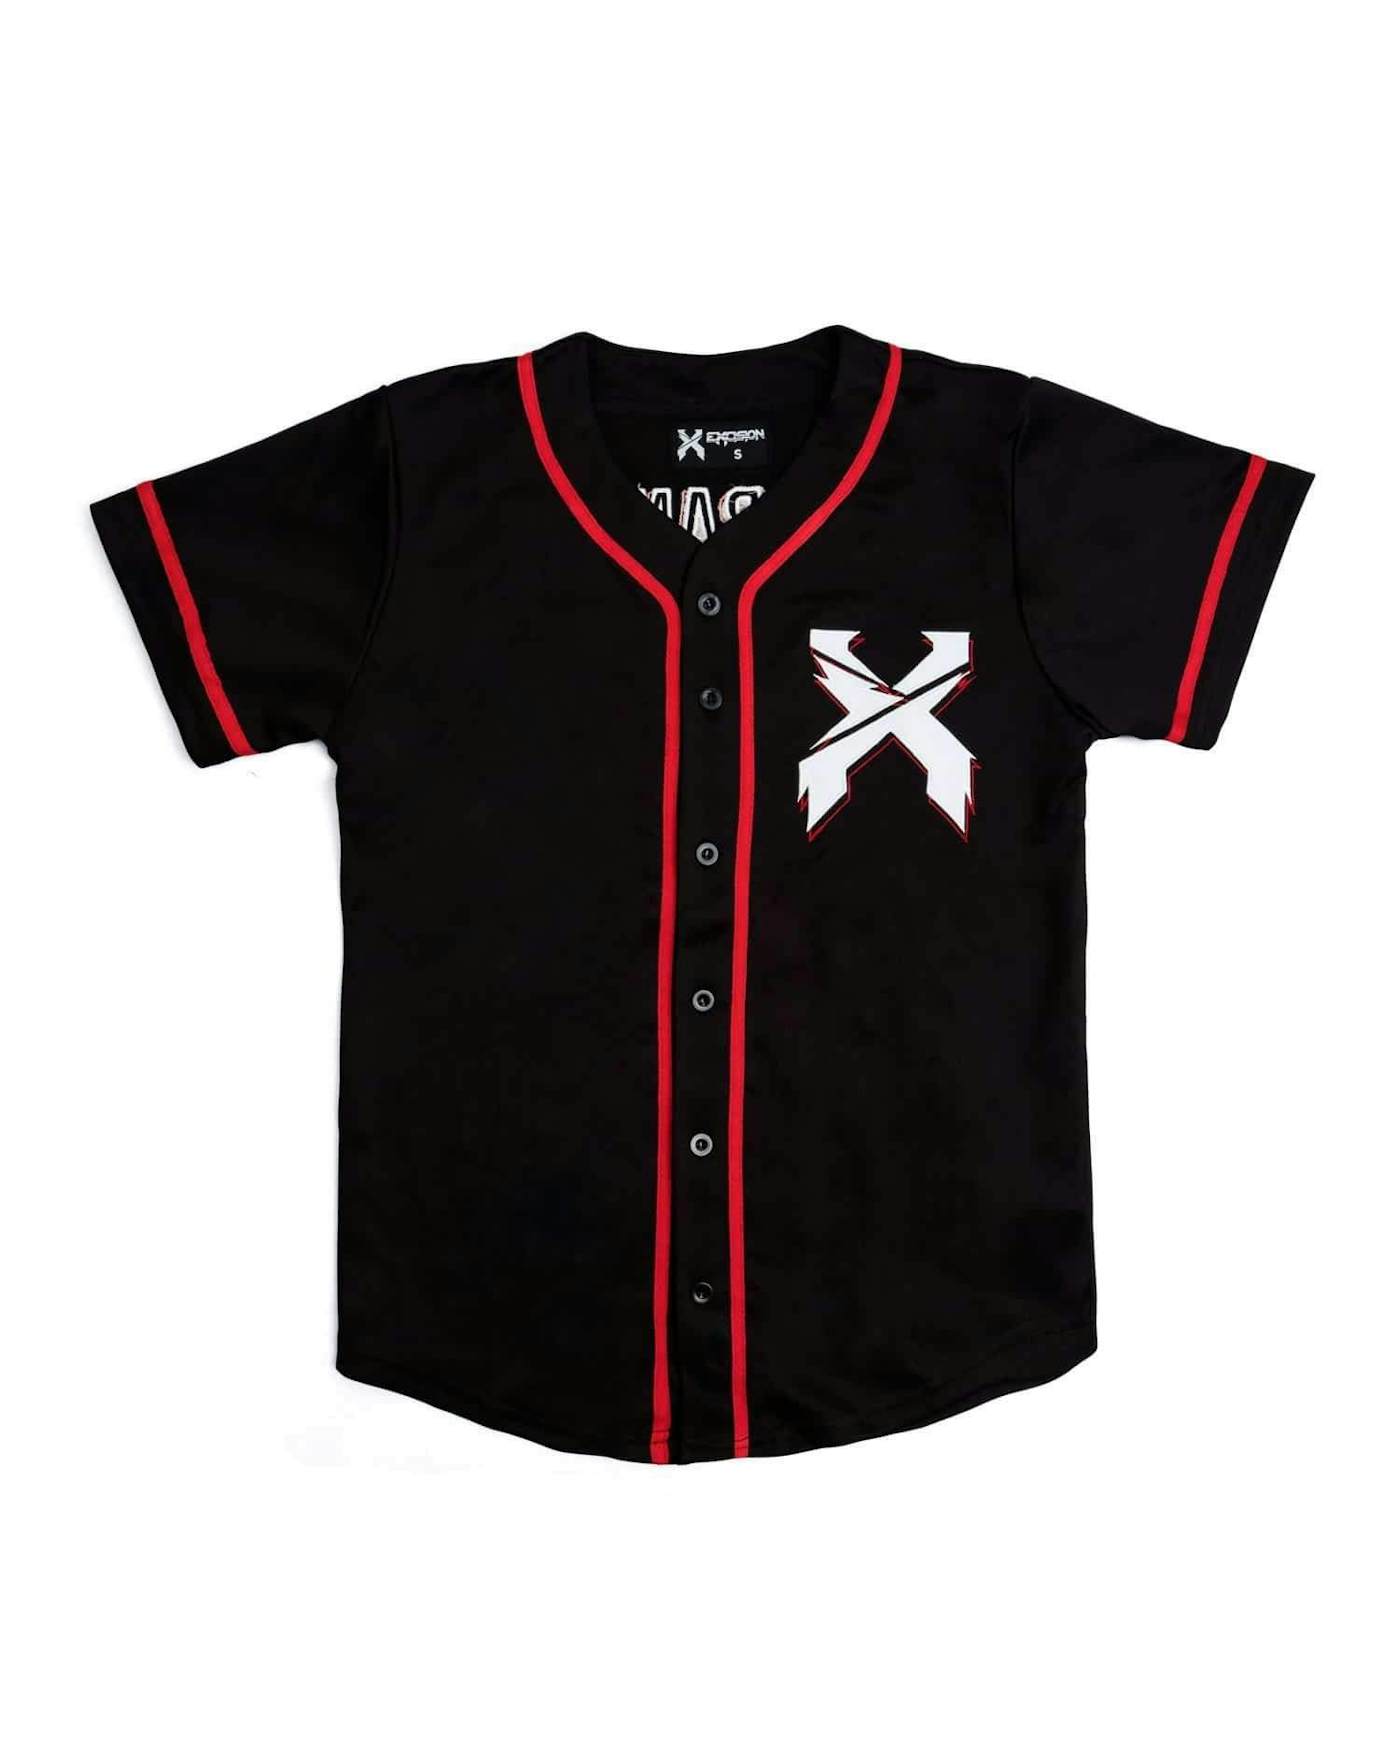 Excision Baseball Jersey - Black/Red